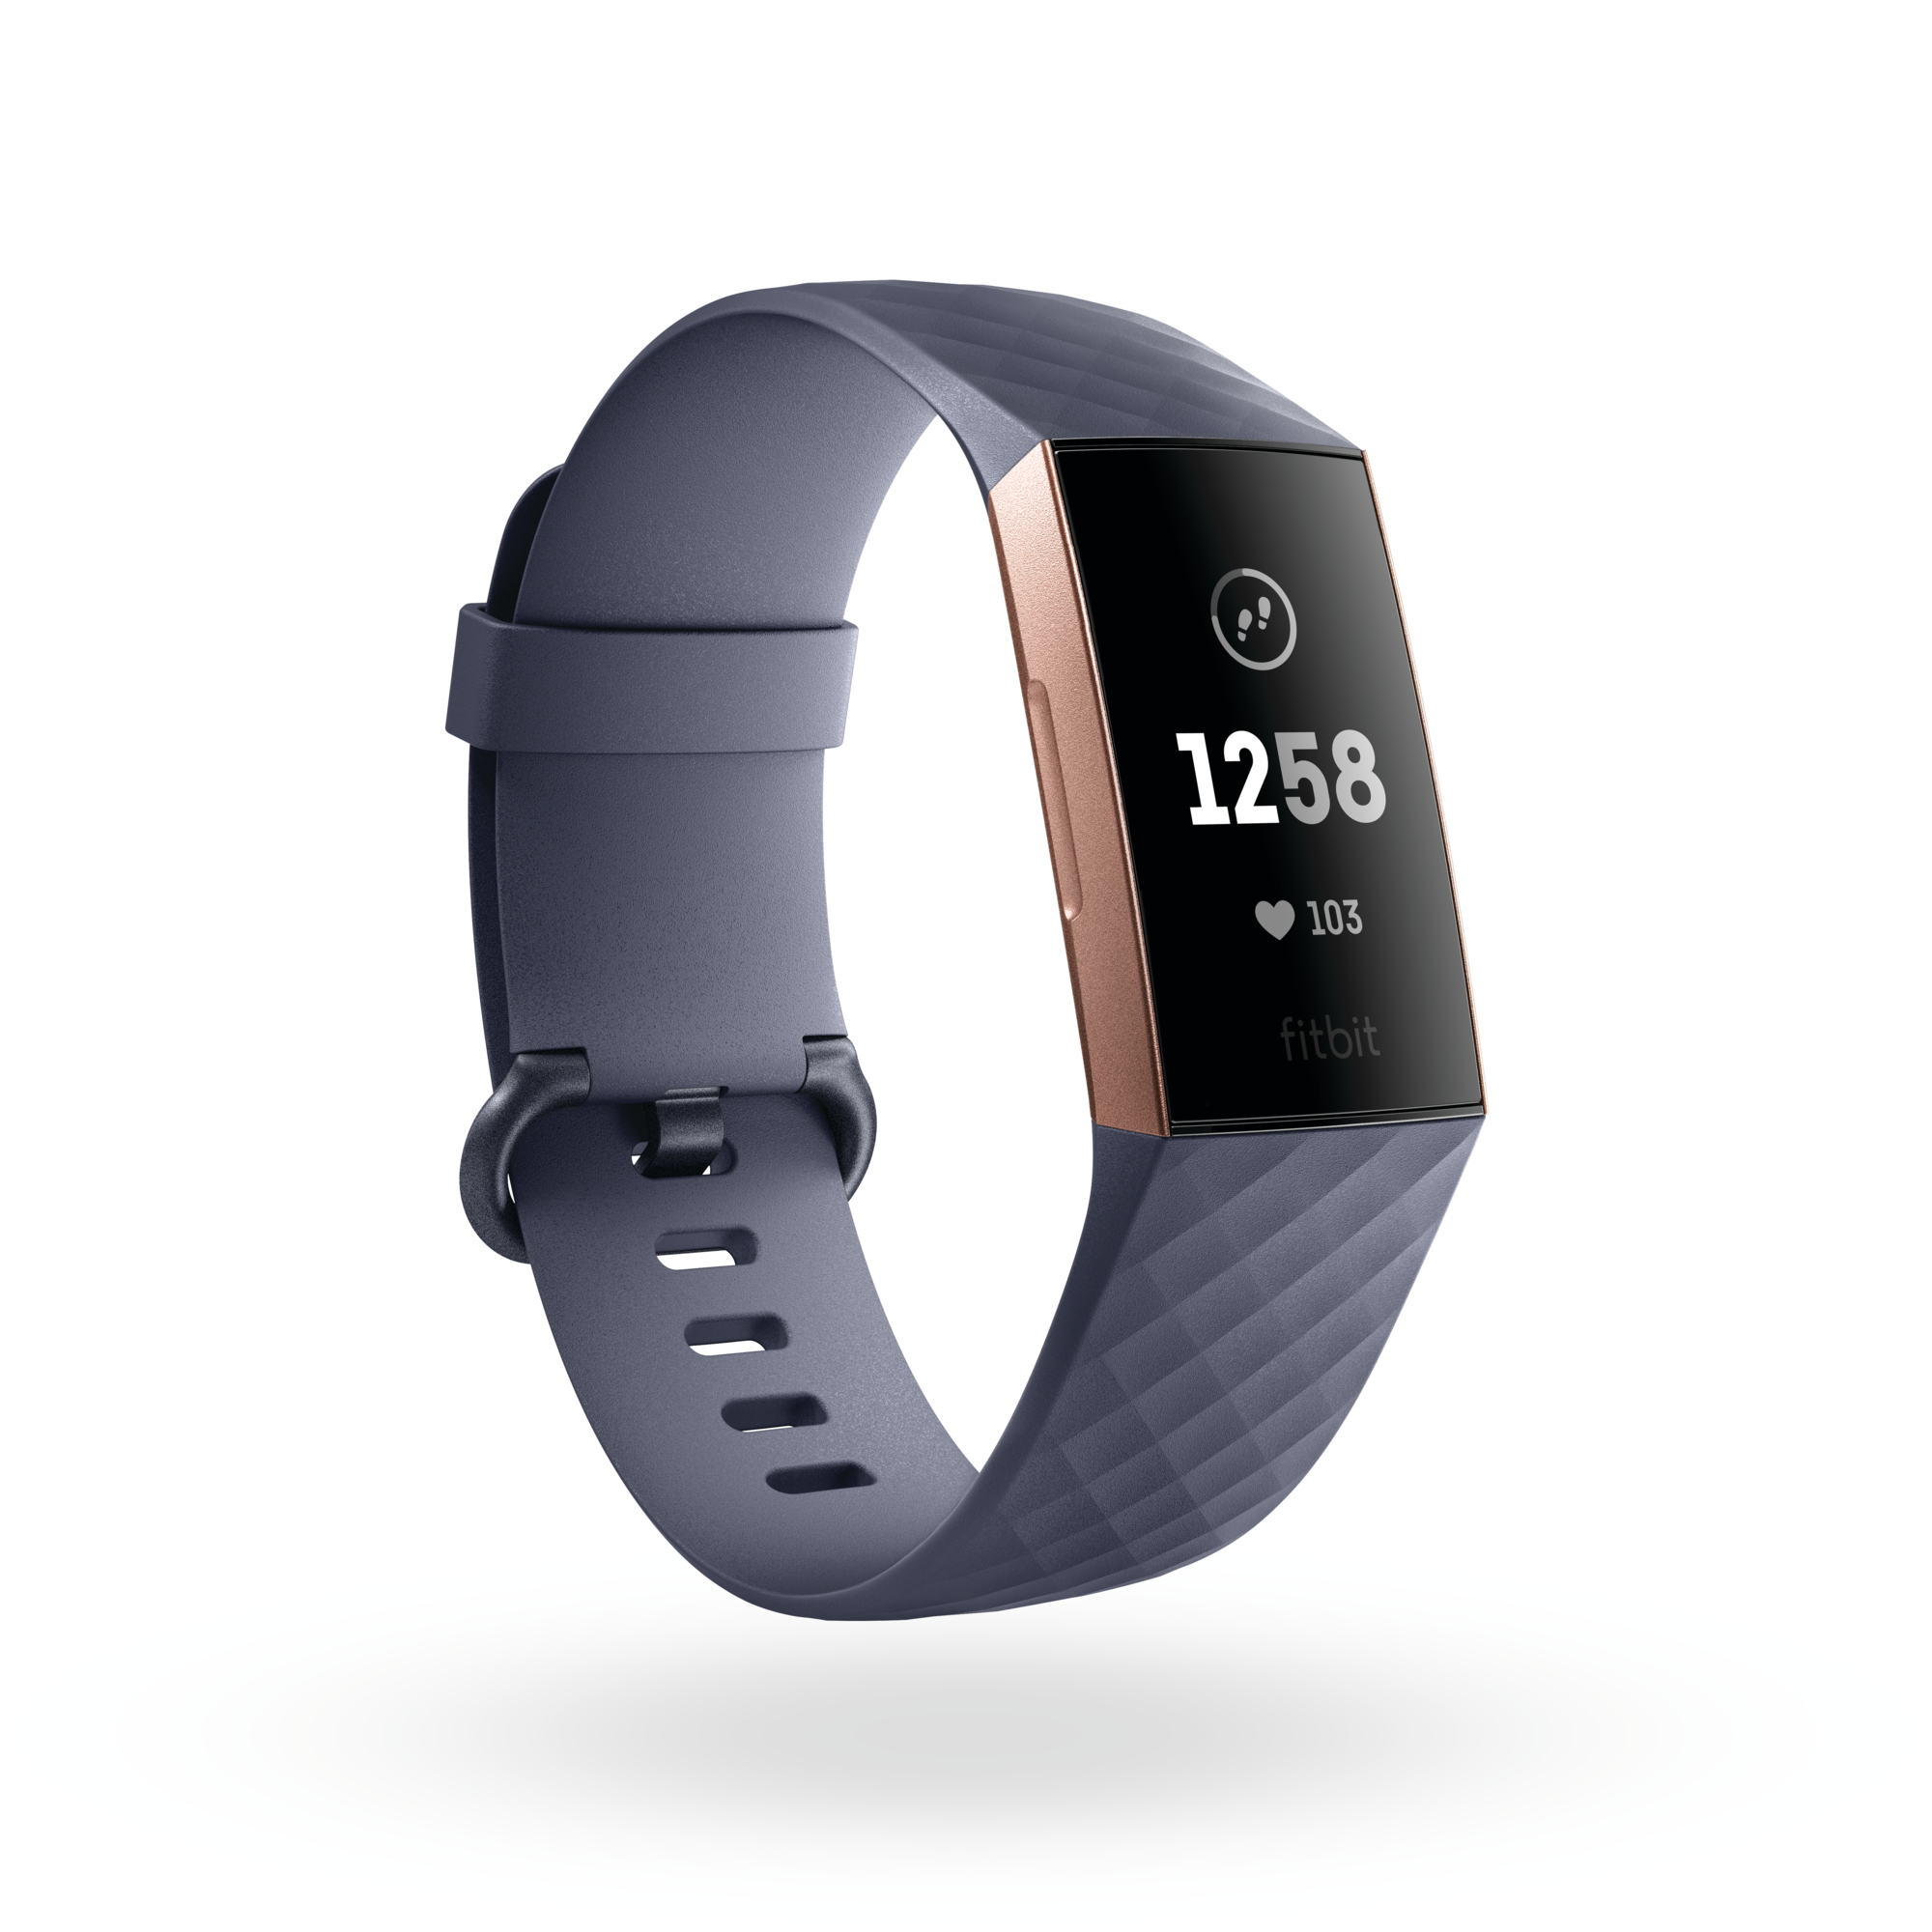 Is the Fitbit Charge 3 waterproof? | iMore